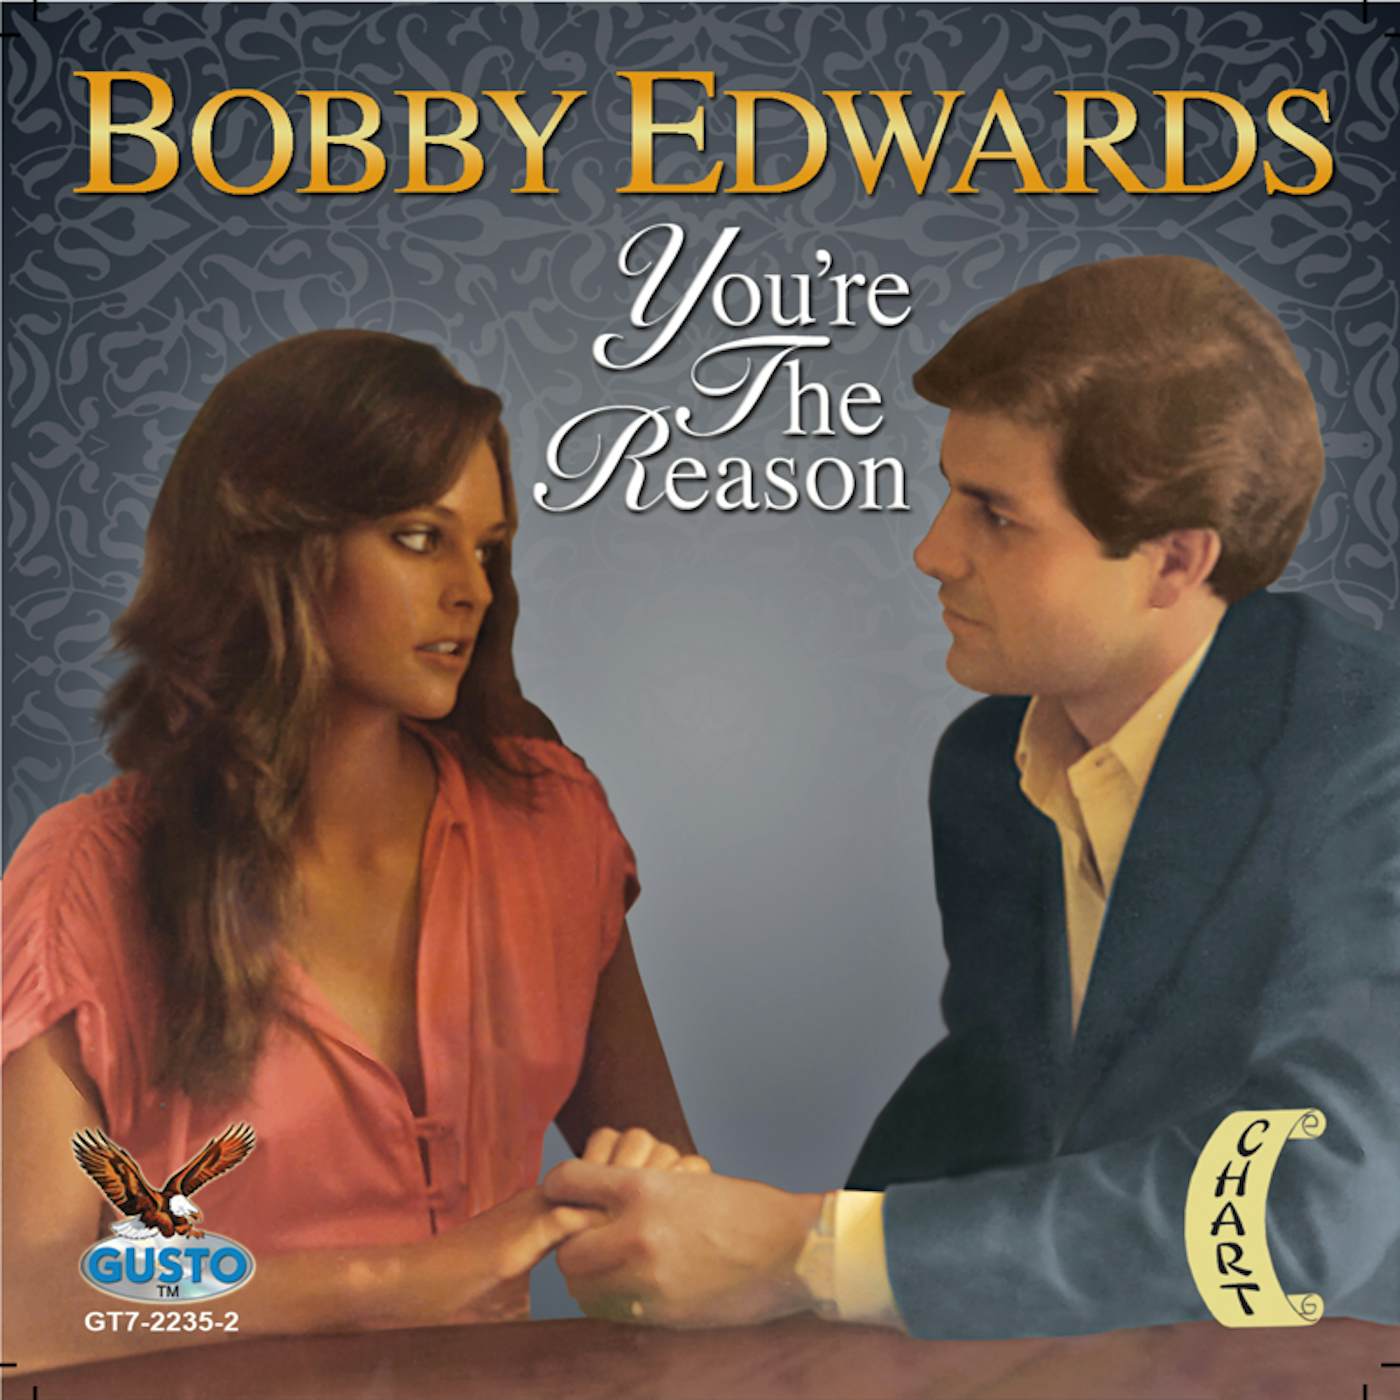 Bobby Edwards YOU'RE THE REASON CD